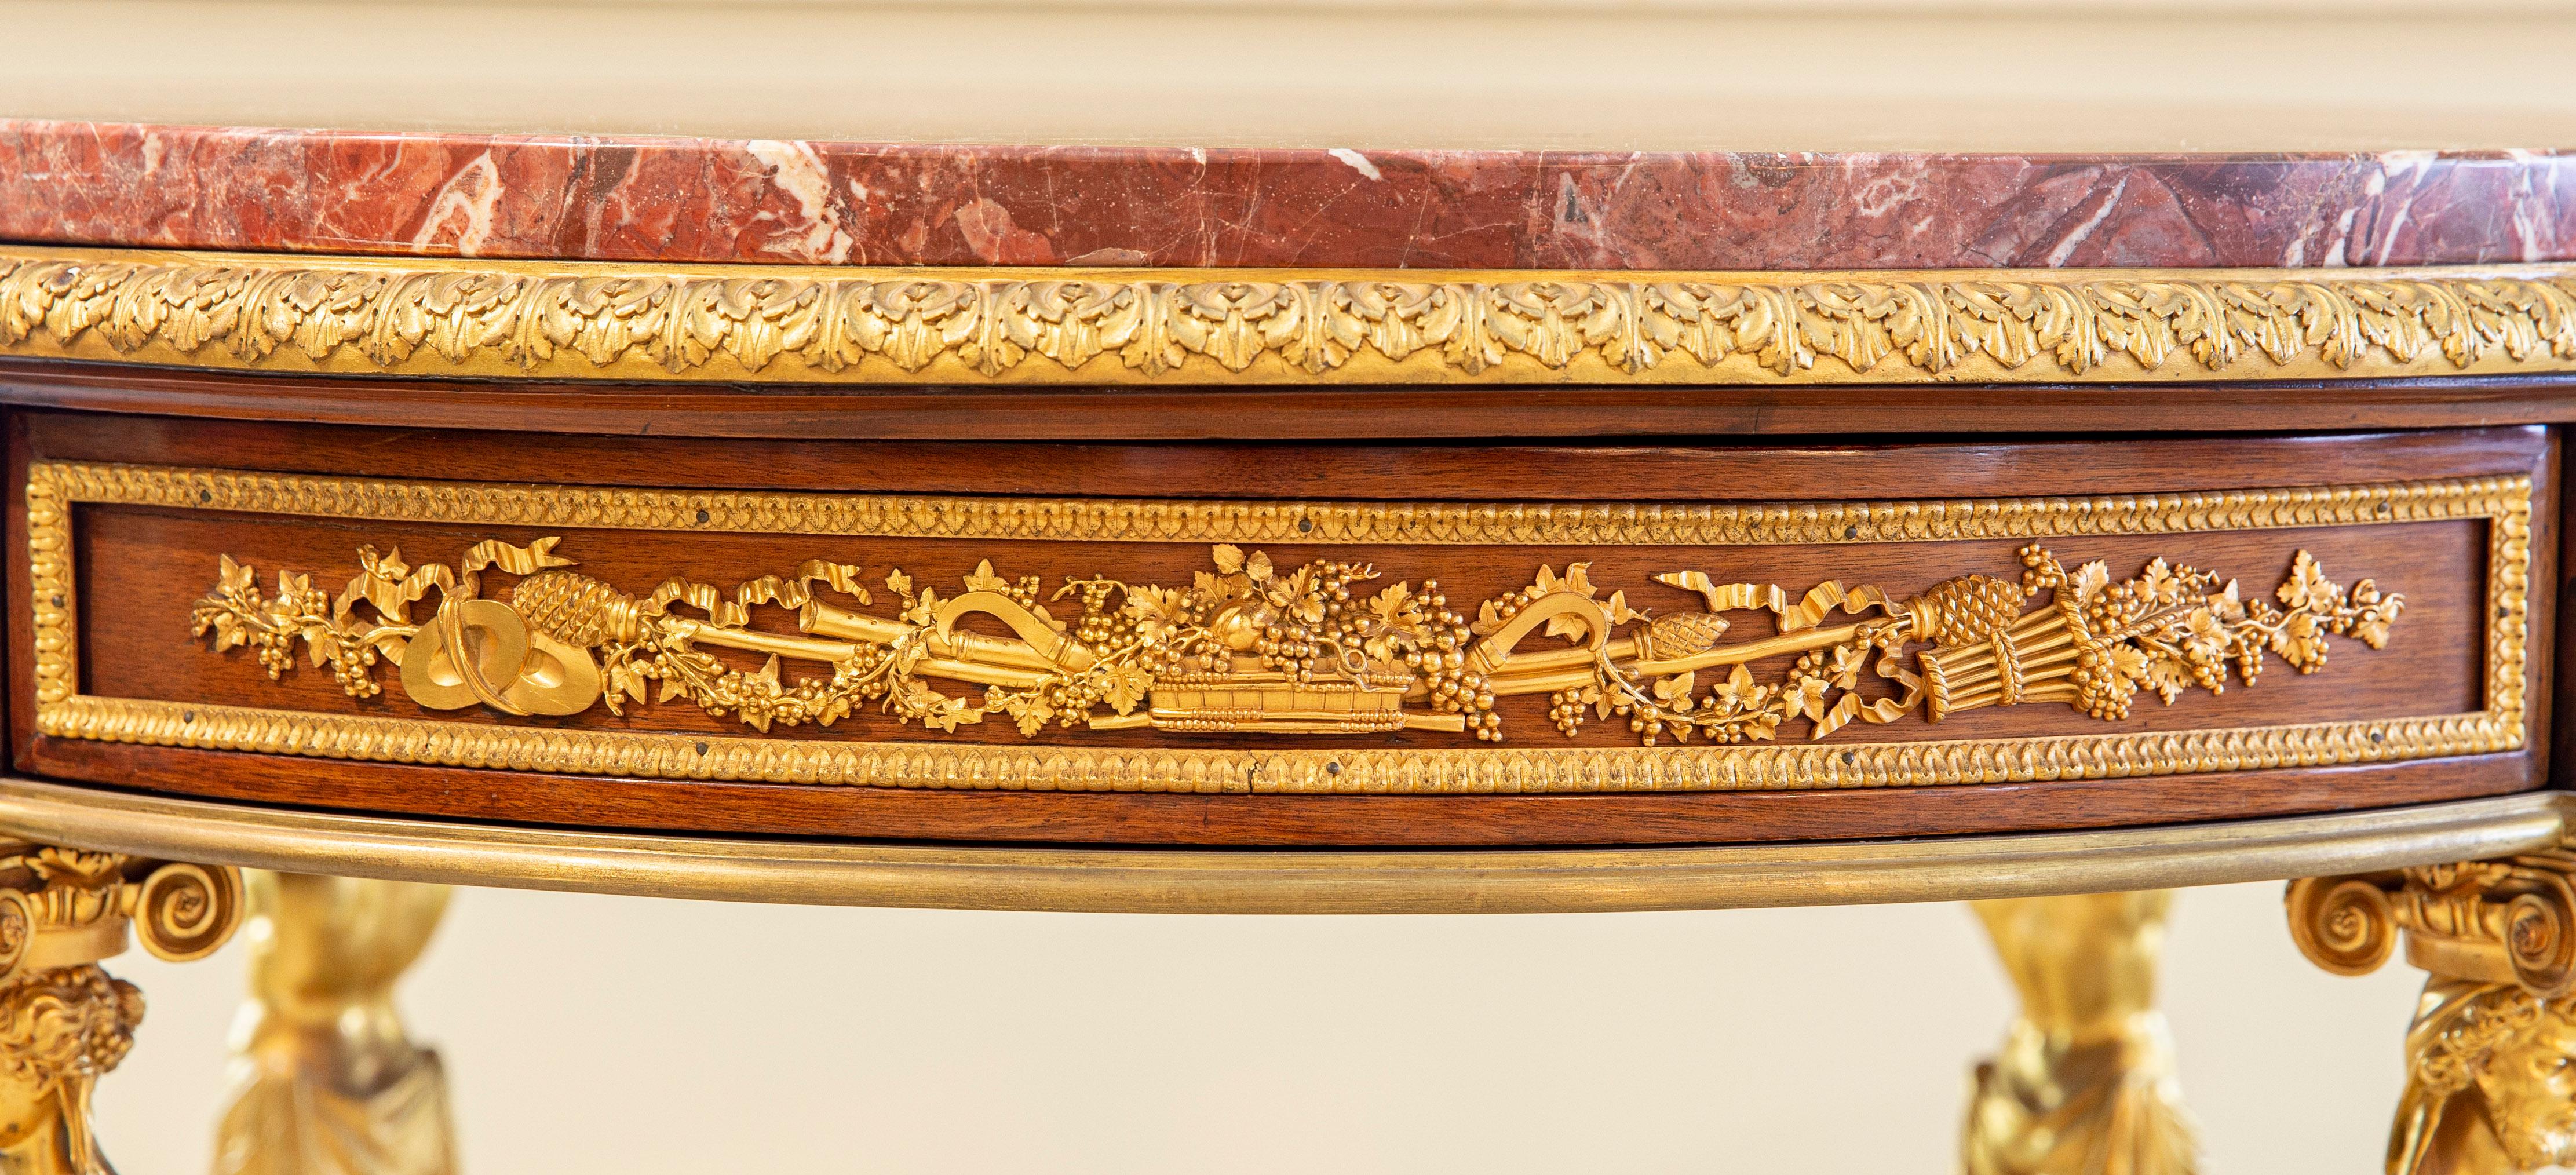 A Very Fine Late 19th Century Gilt Bronze Mounted Center Table by Henry Dasson For Sale 2